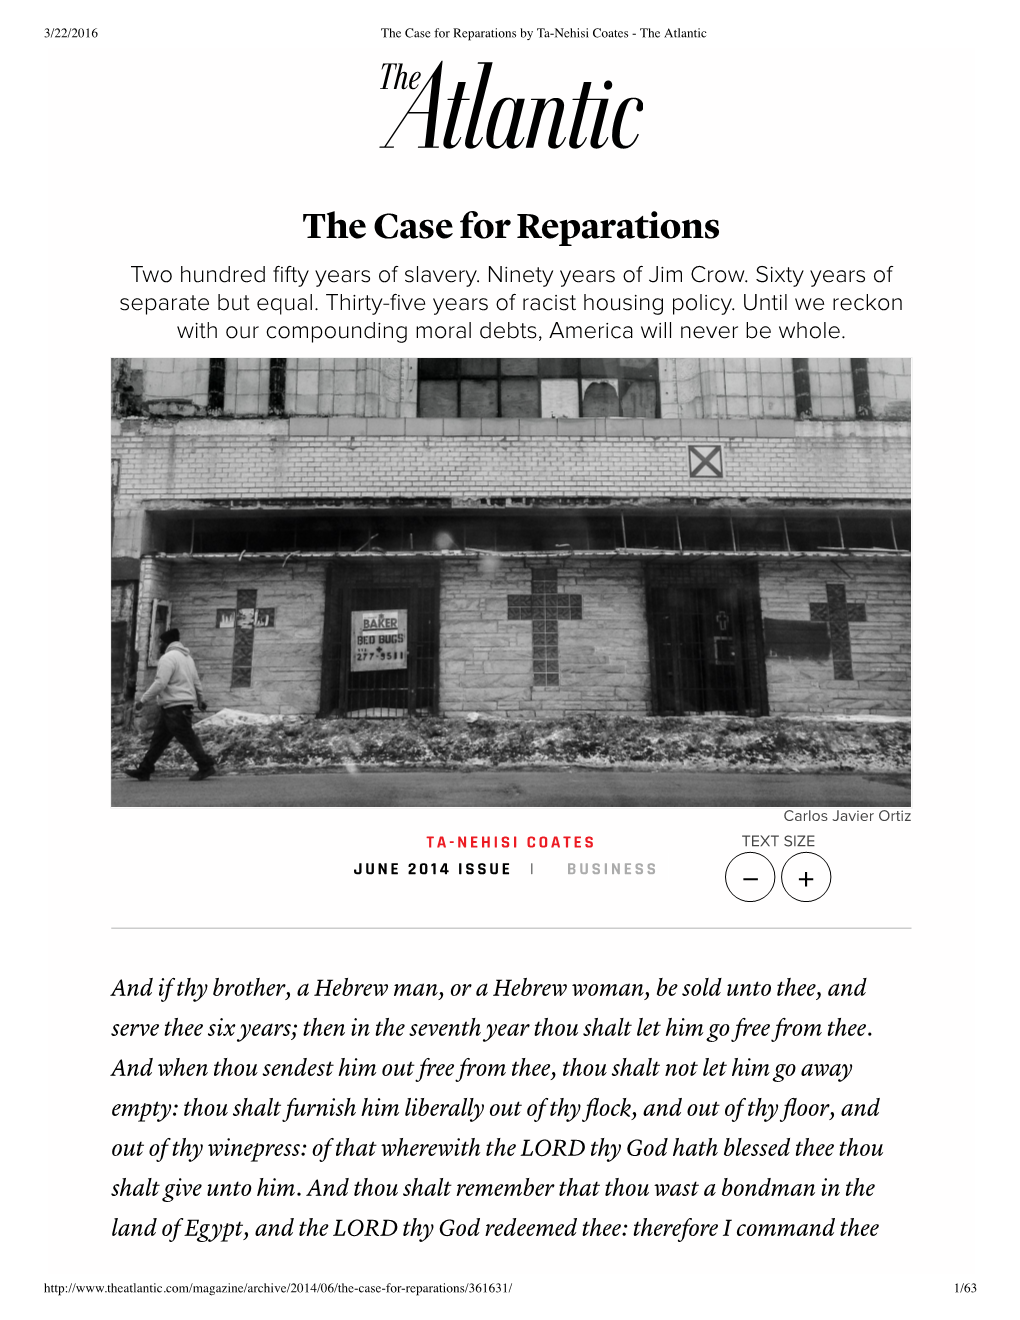 The Case for Reparations by Ta-Nehisi Coates - the Atlantic